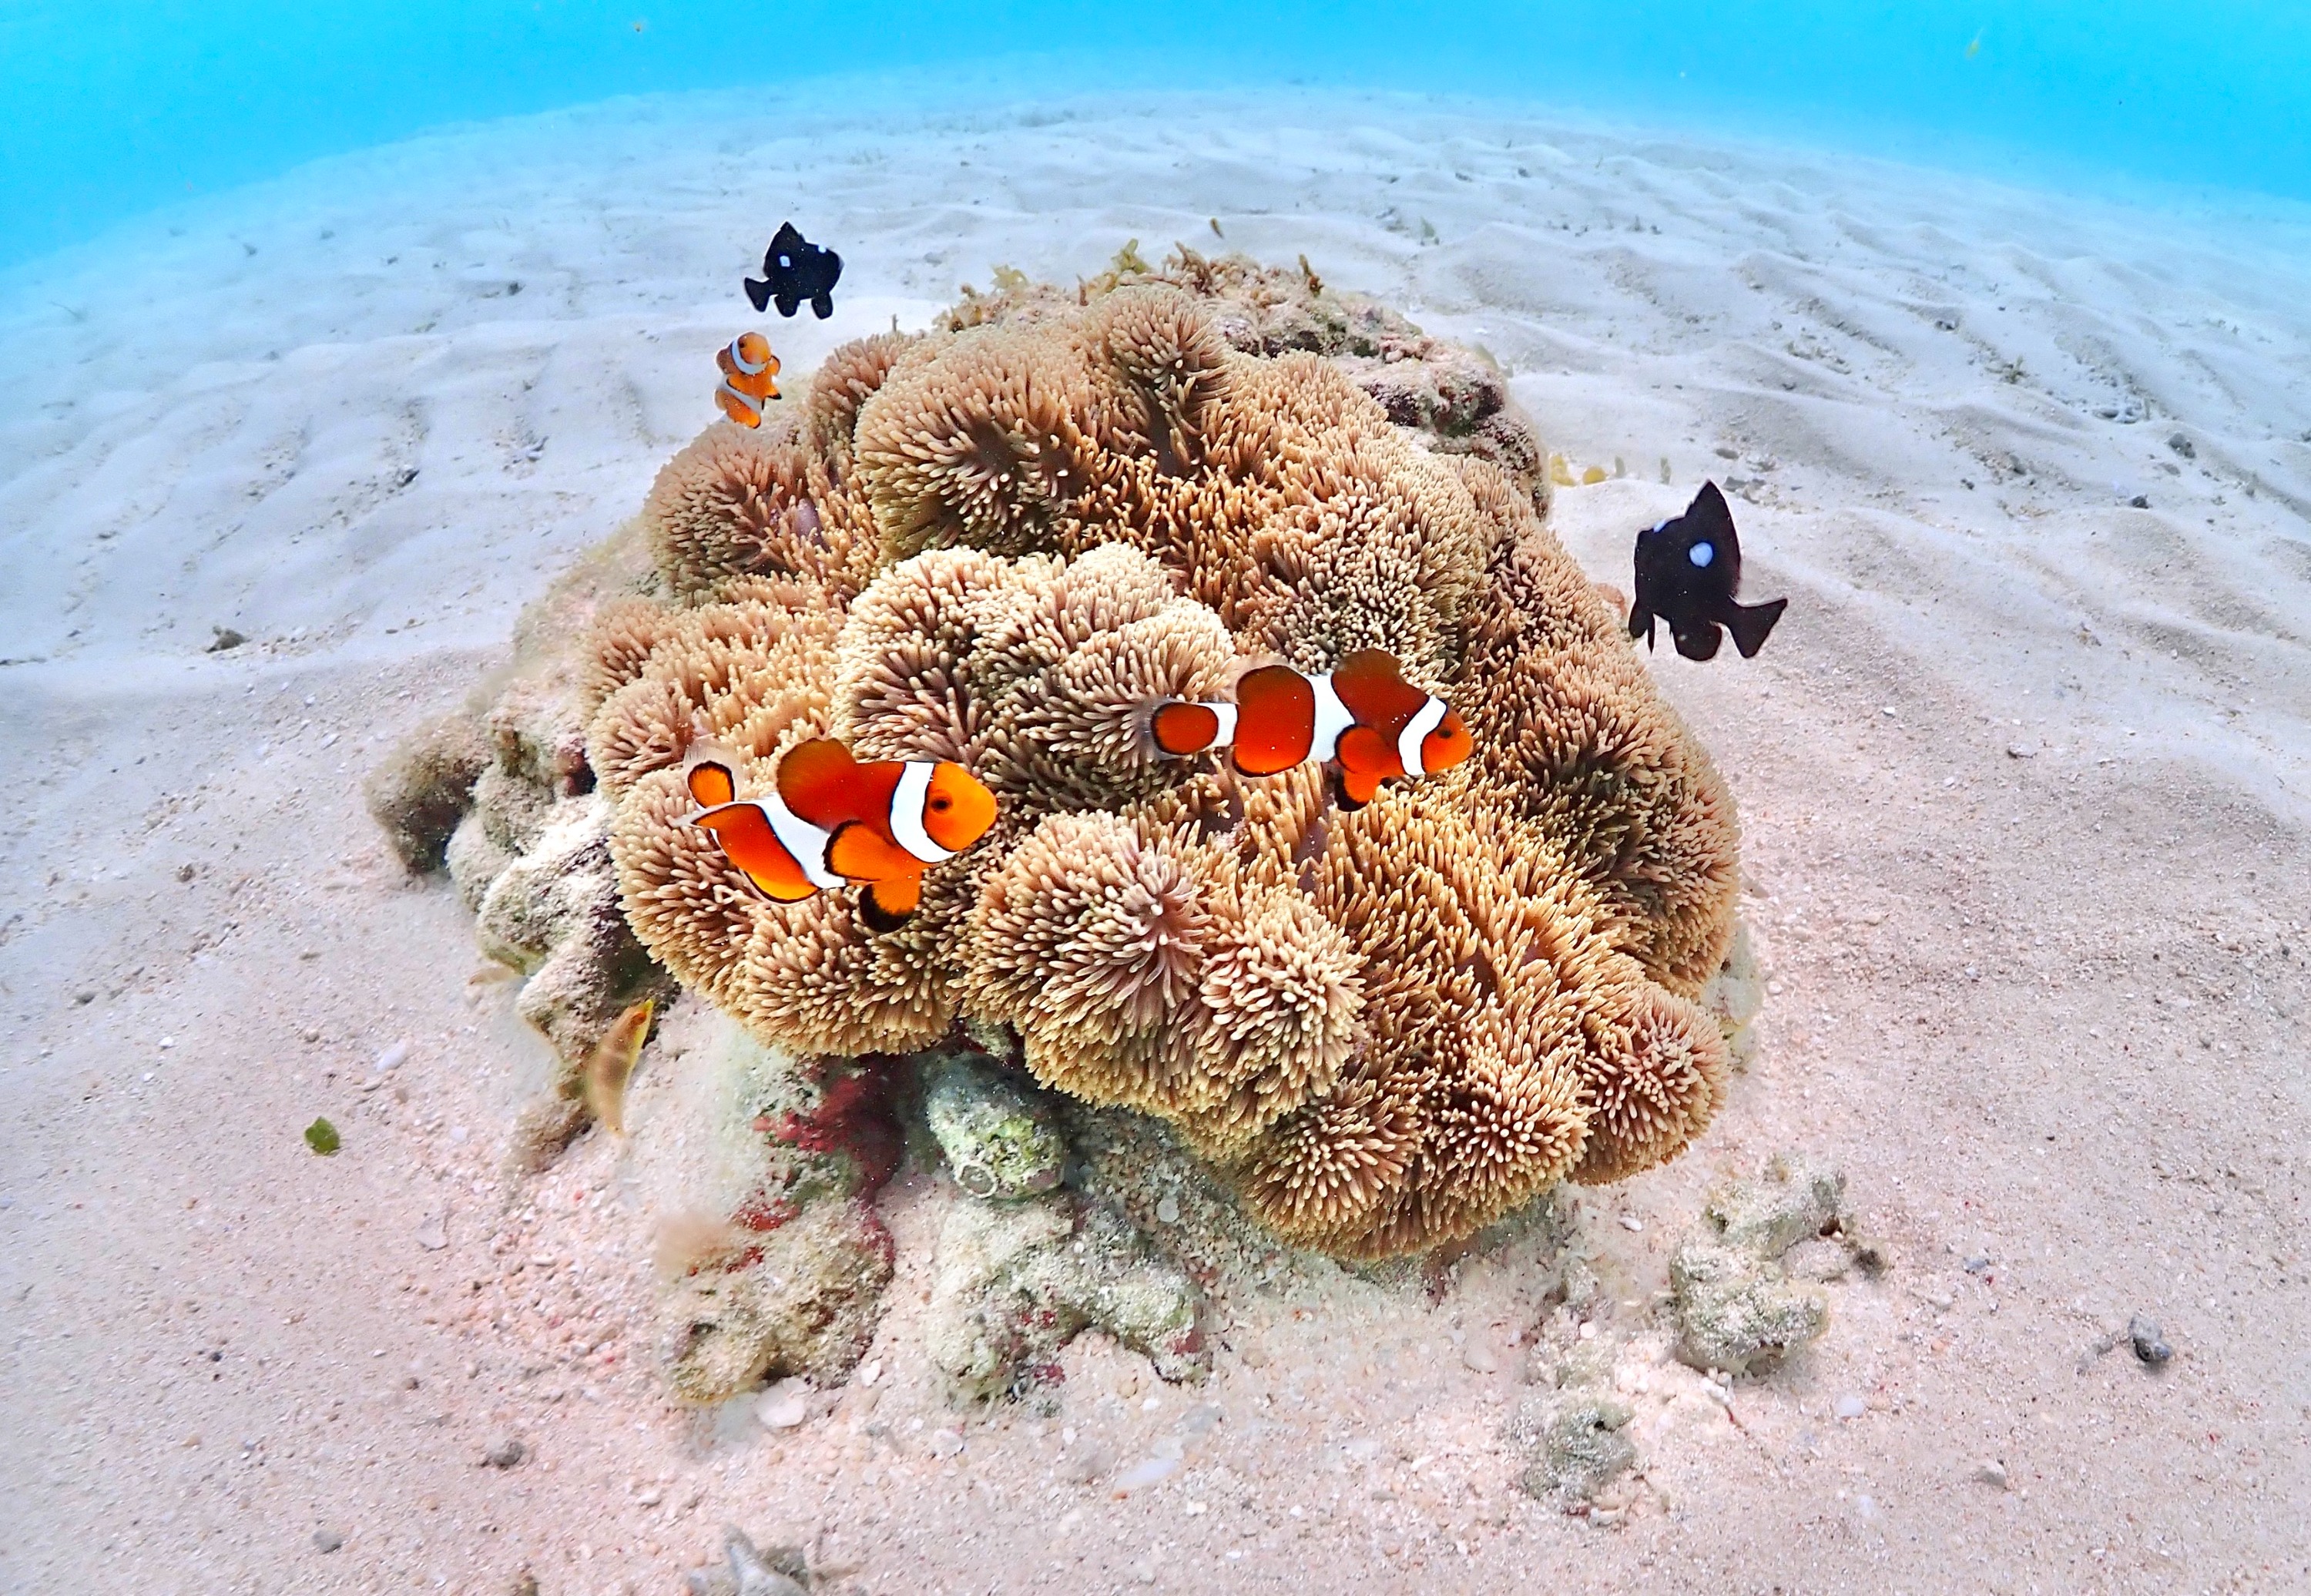 Snorkel Tour & Private Beach Diving Experience in Okinawa